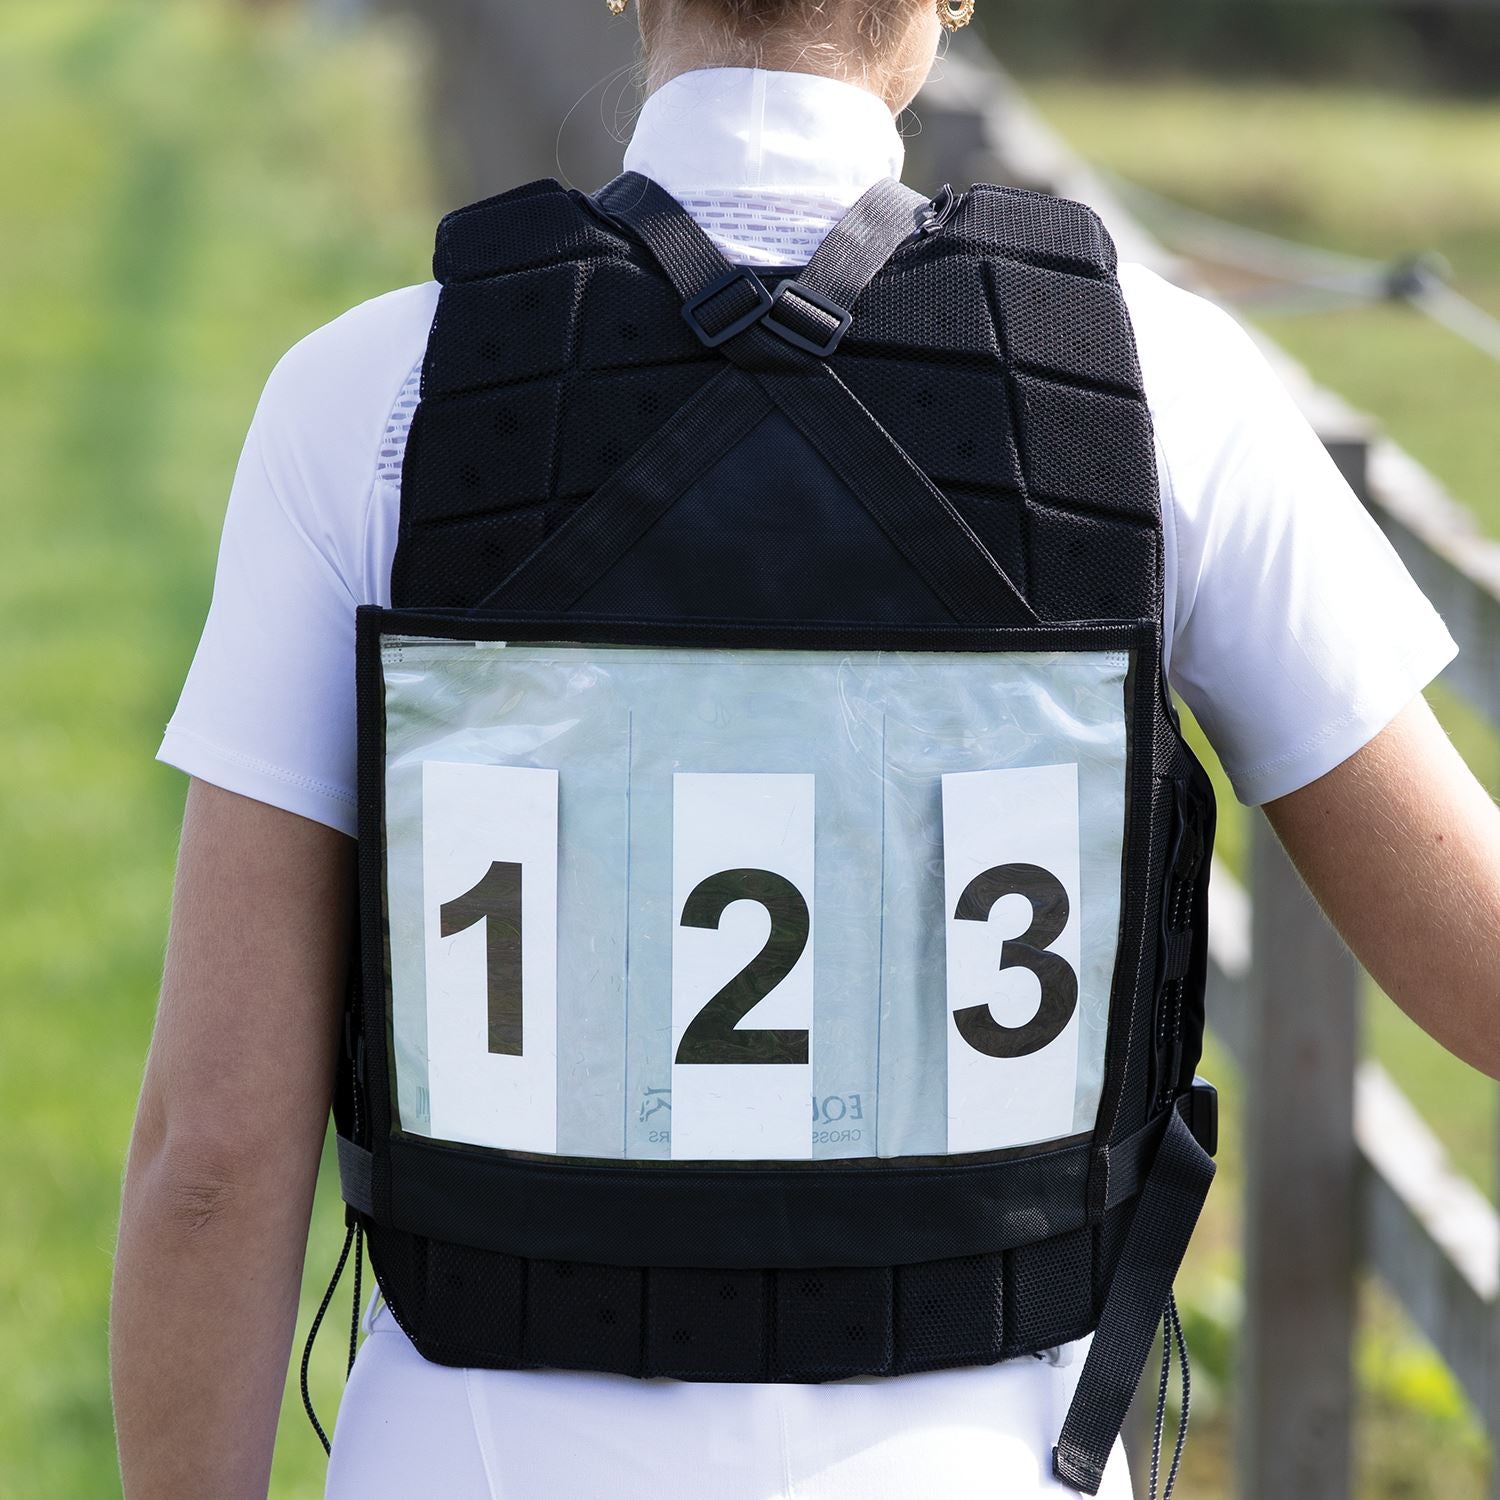 Equetech Eventing Competition Bib Numbers - Just Horse Riders